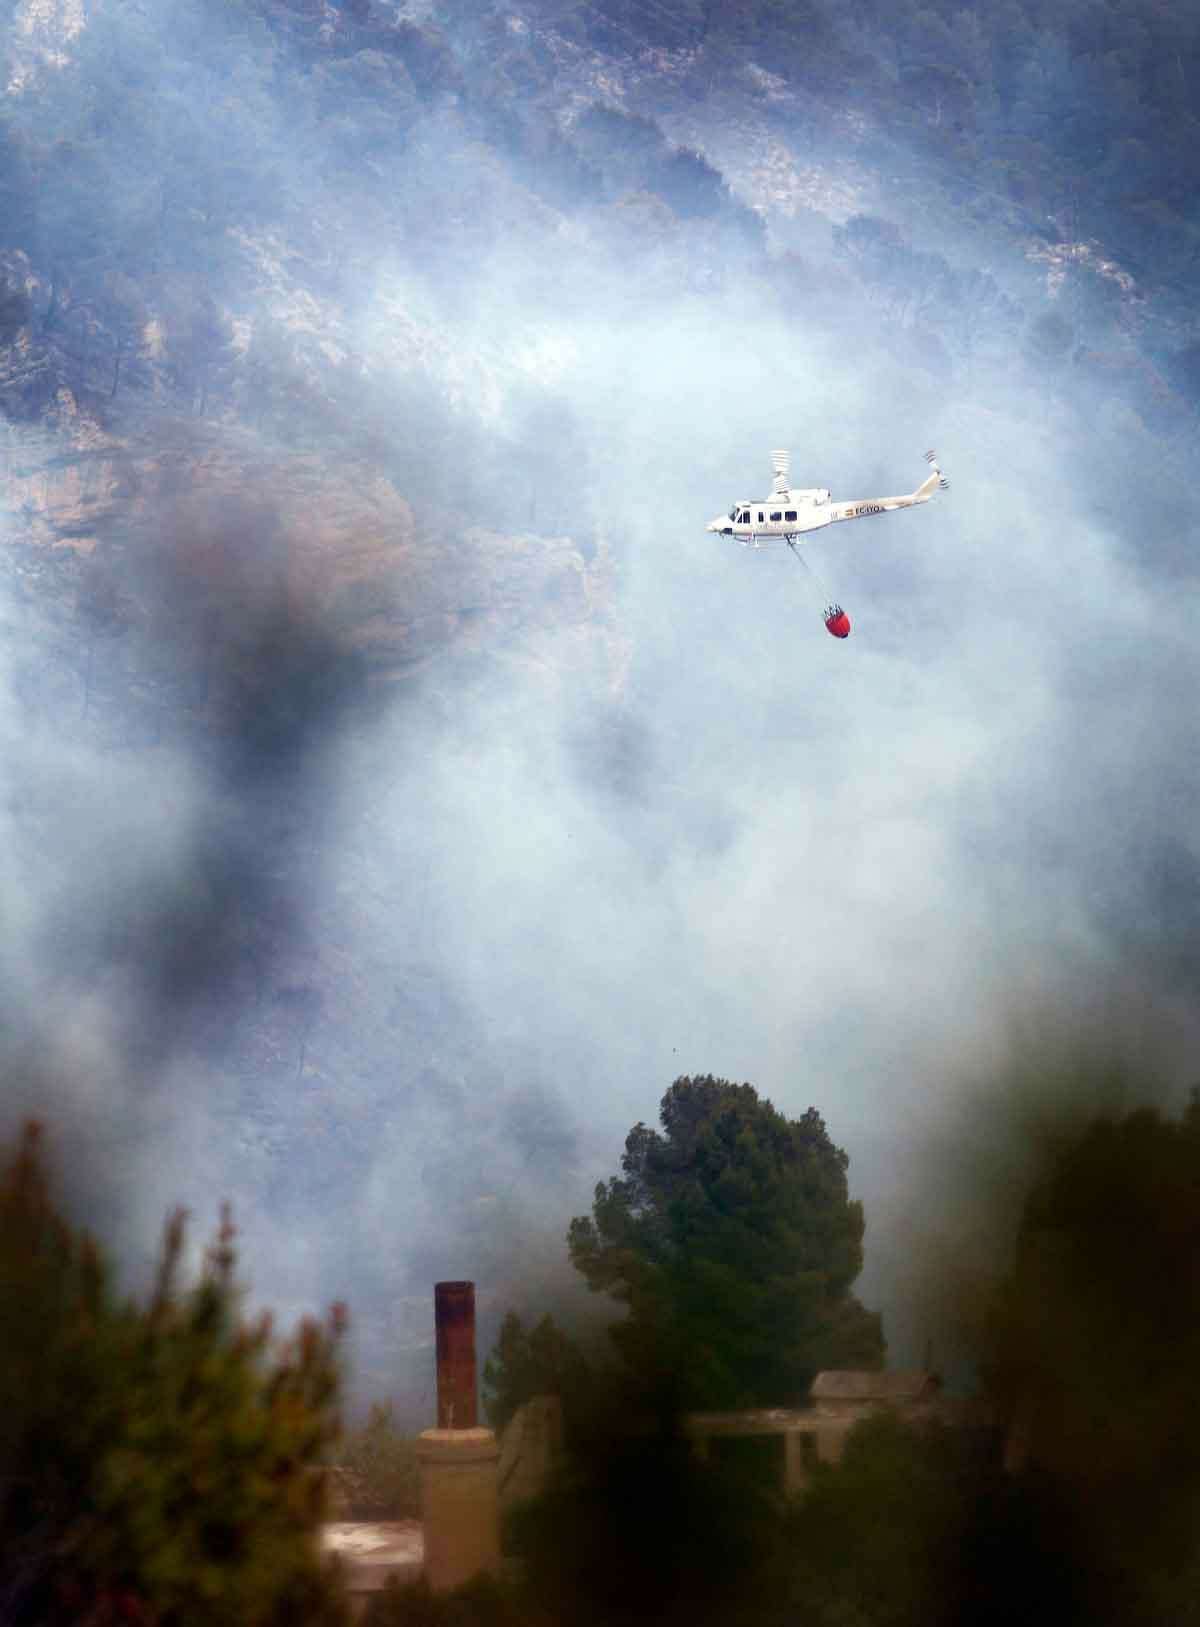 A helicopter flies next over a wildfire in Tuejar, near Valencia, Spain, on Saturday, June 2, 2012. Regional government said wildfire has burned almost 1000 hectares (2400 acres) of forest, while more than 300 firefighters, 8 helicopters and 9 planes are working to stop the fire. (AP Photo/Alberto Saiz)